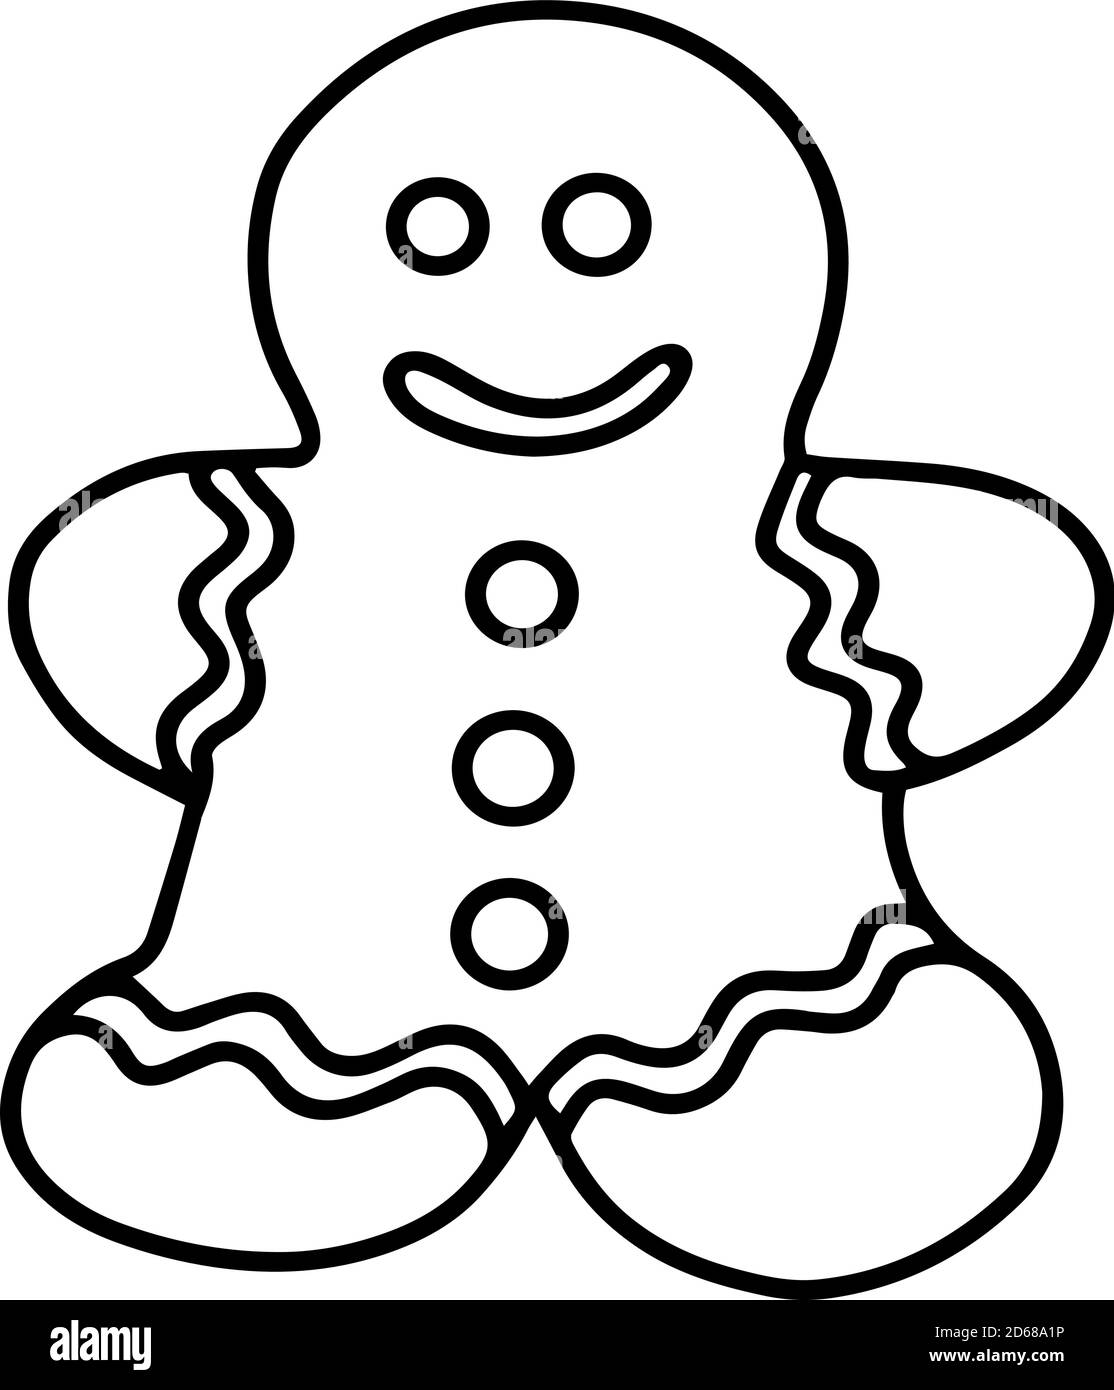 Gingerbread man. Doodle style. Vector illustration Stock Vector